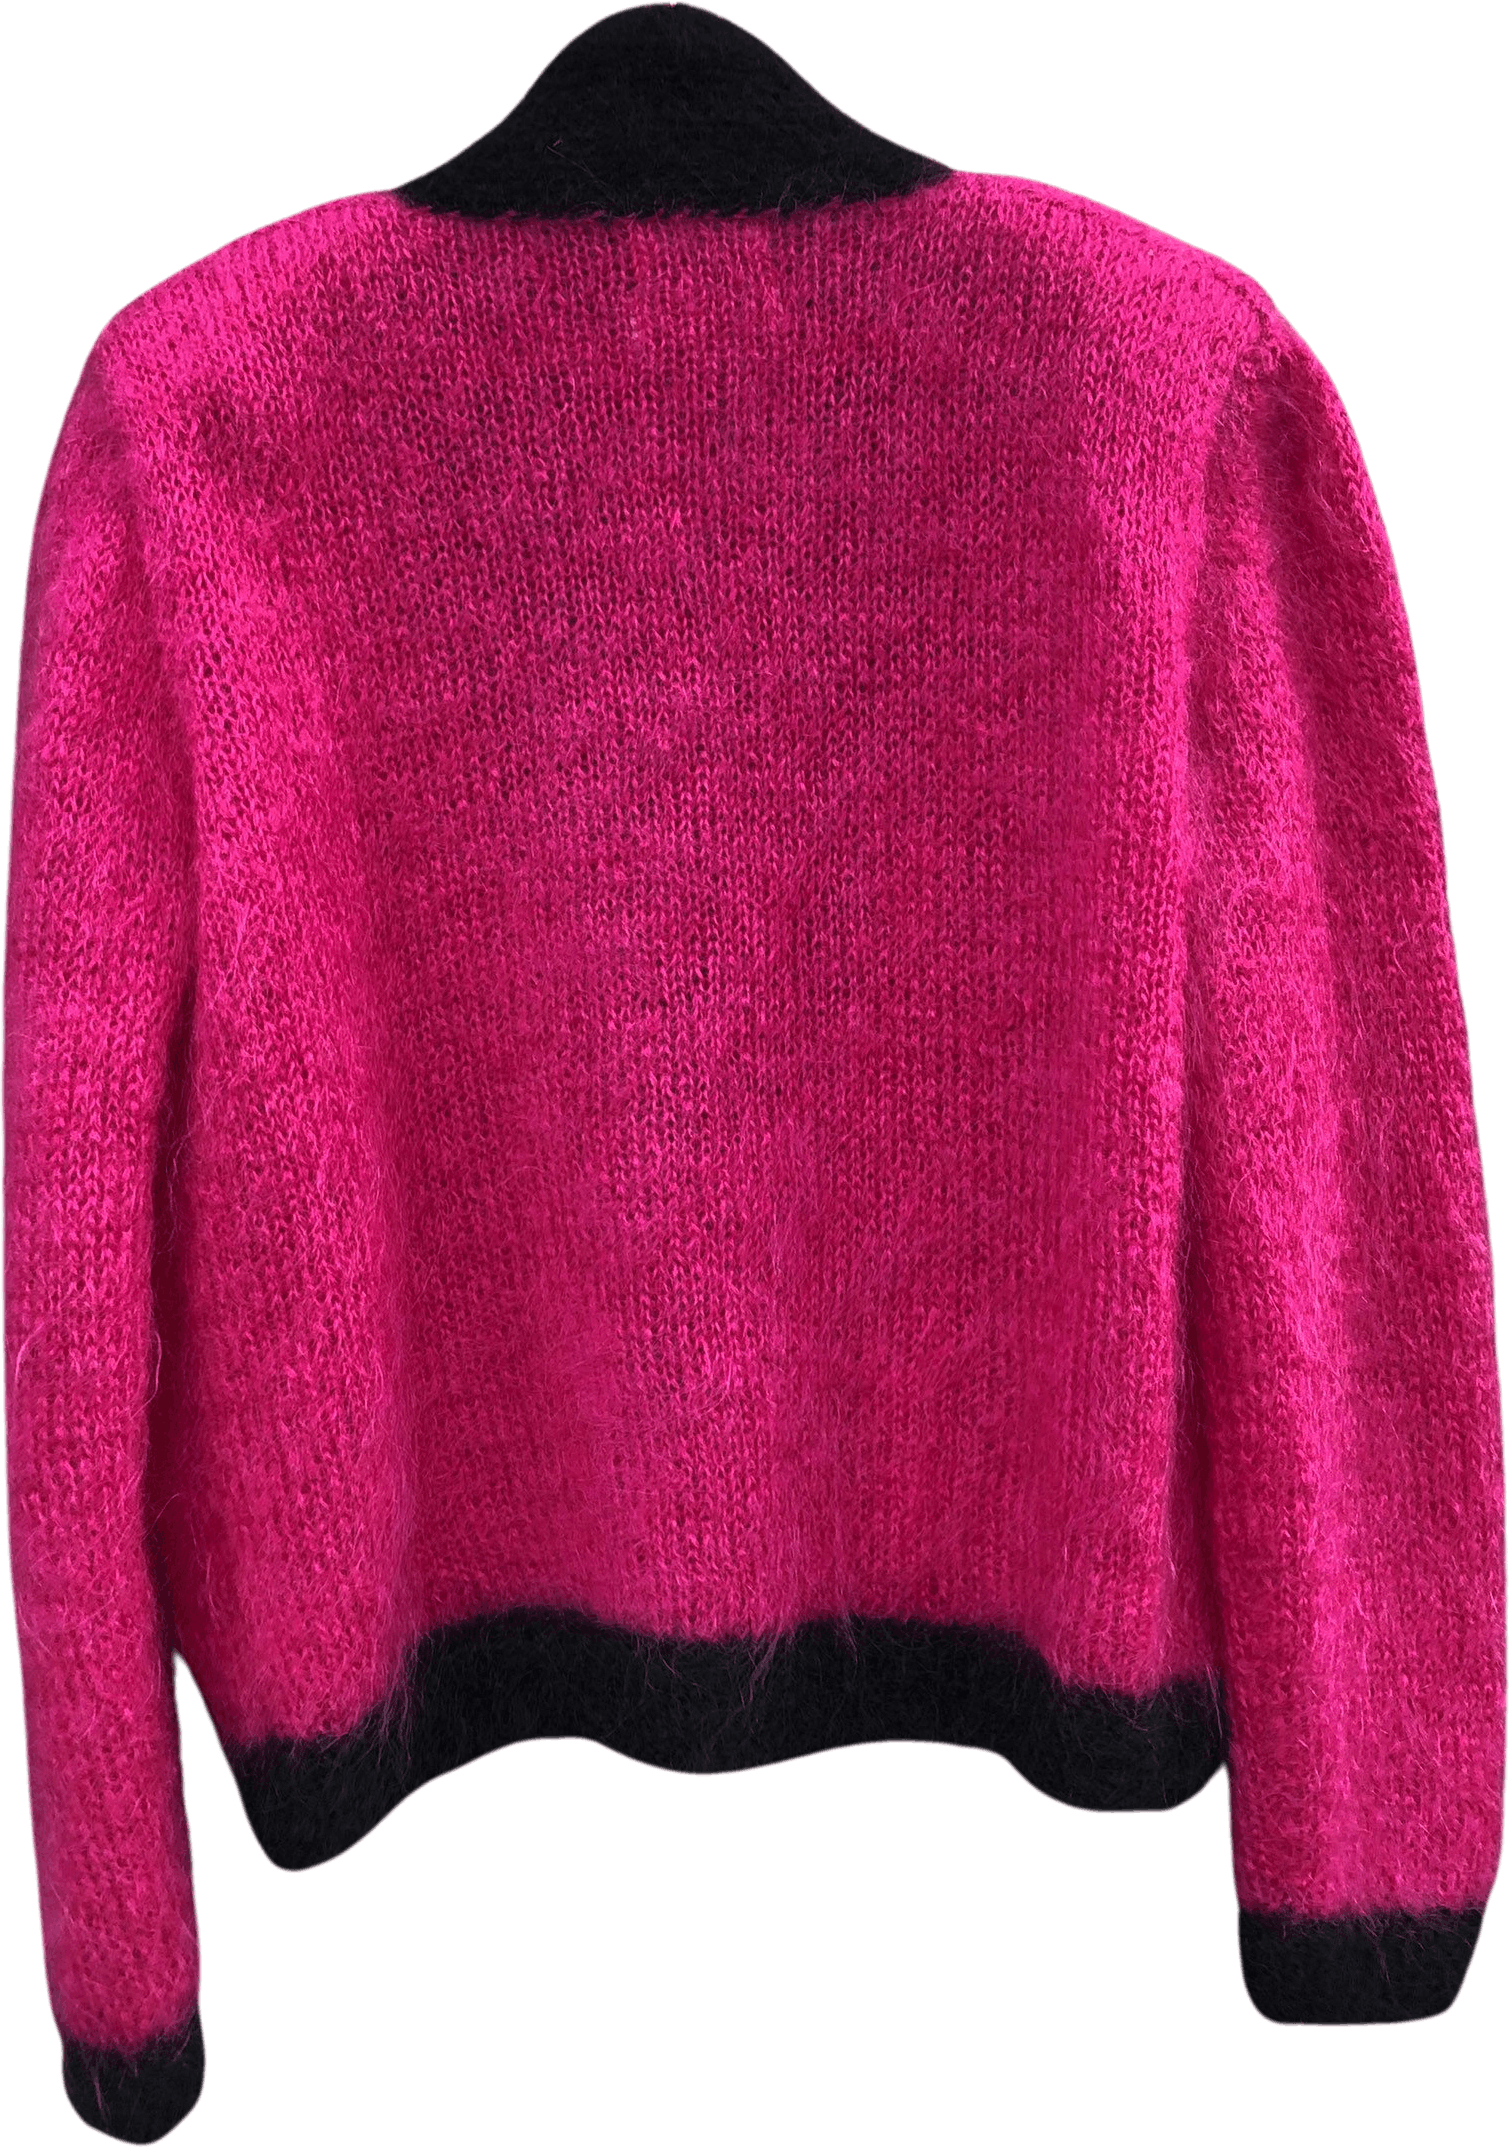 size ML 1980s Pretty in Pink Mohair & Wool Cardigan Sweater by Nordstrom